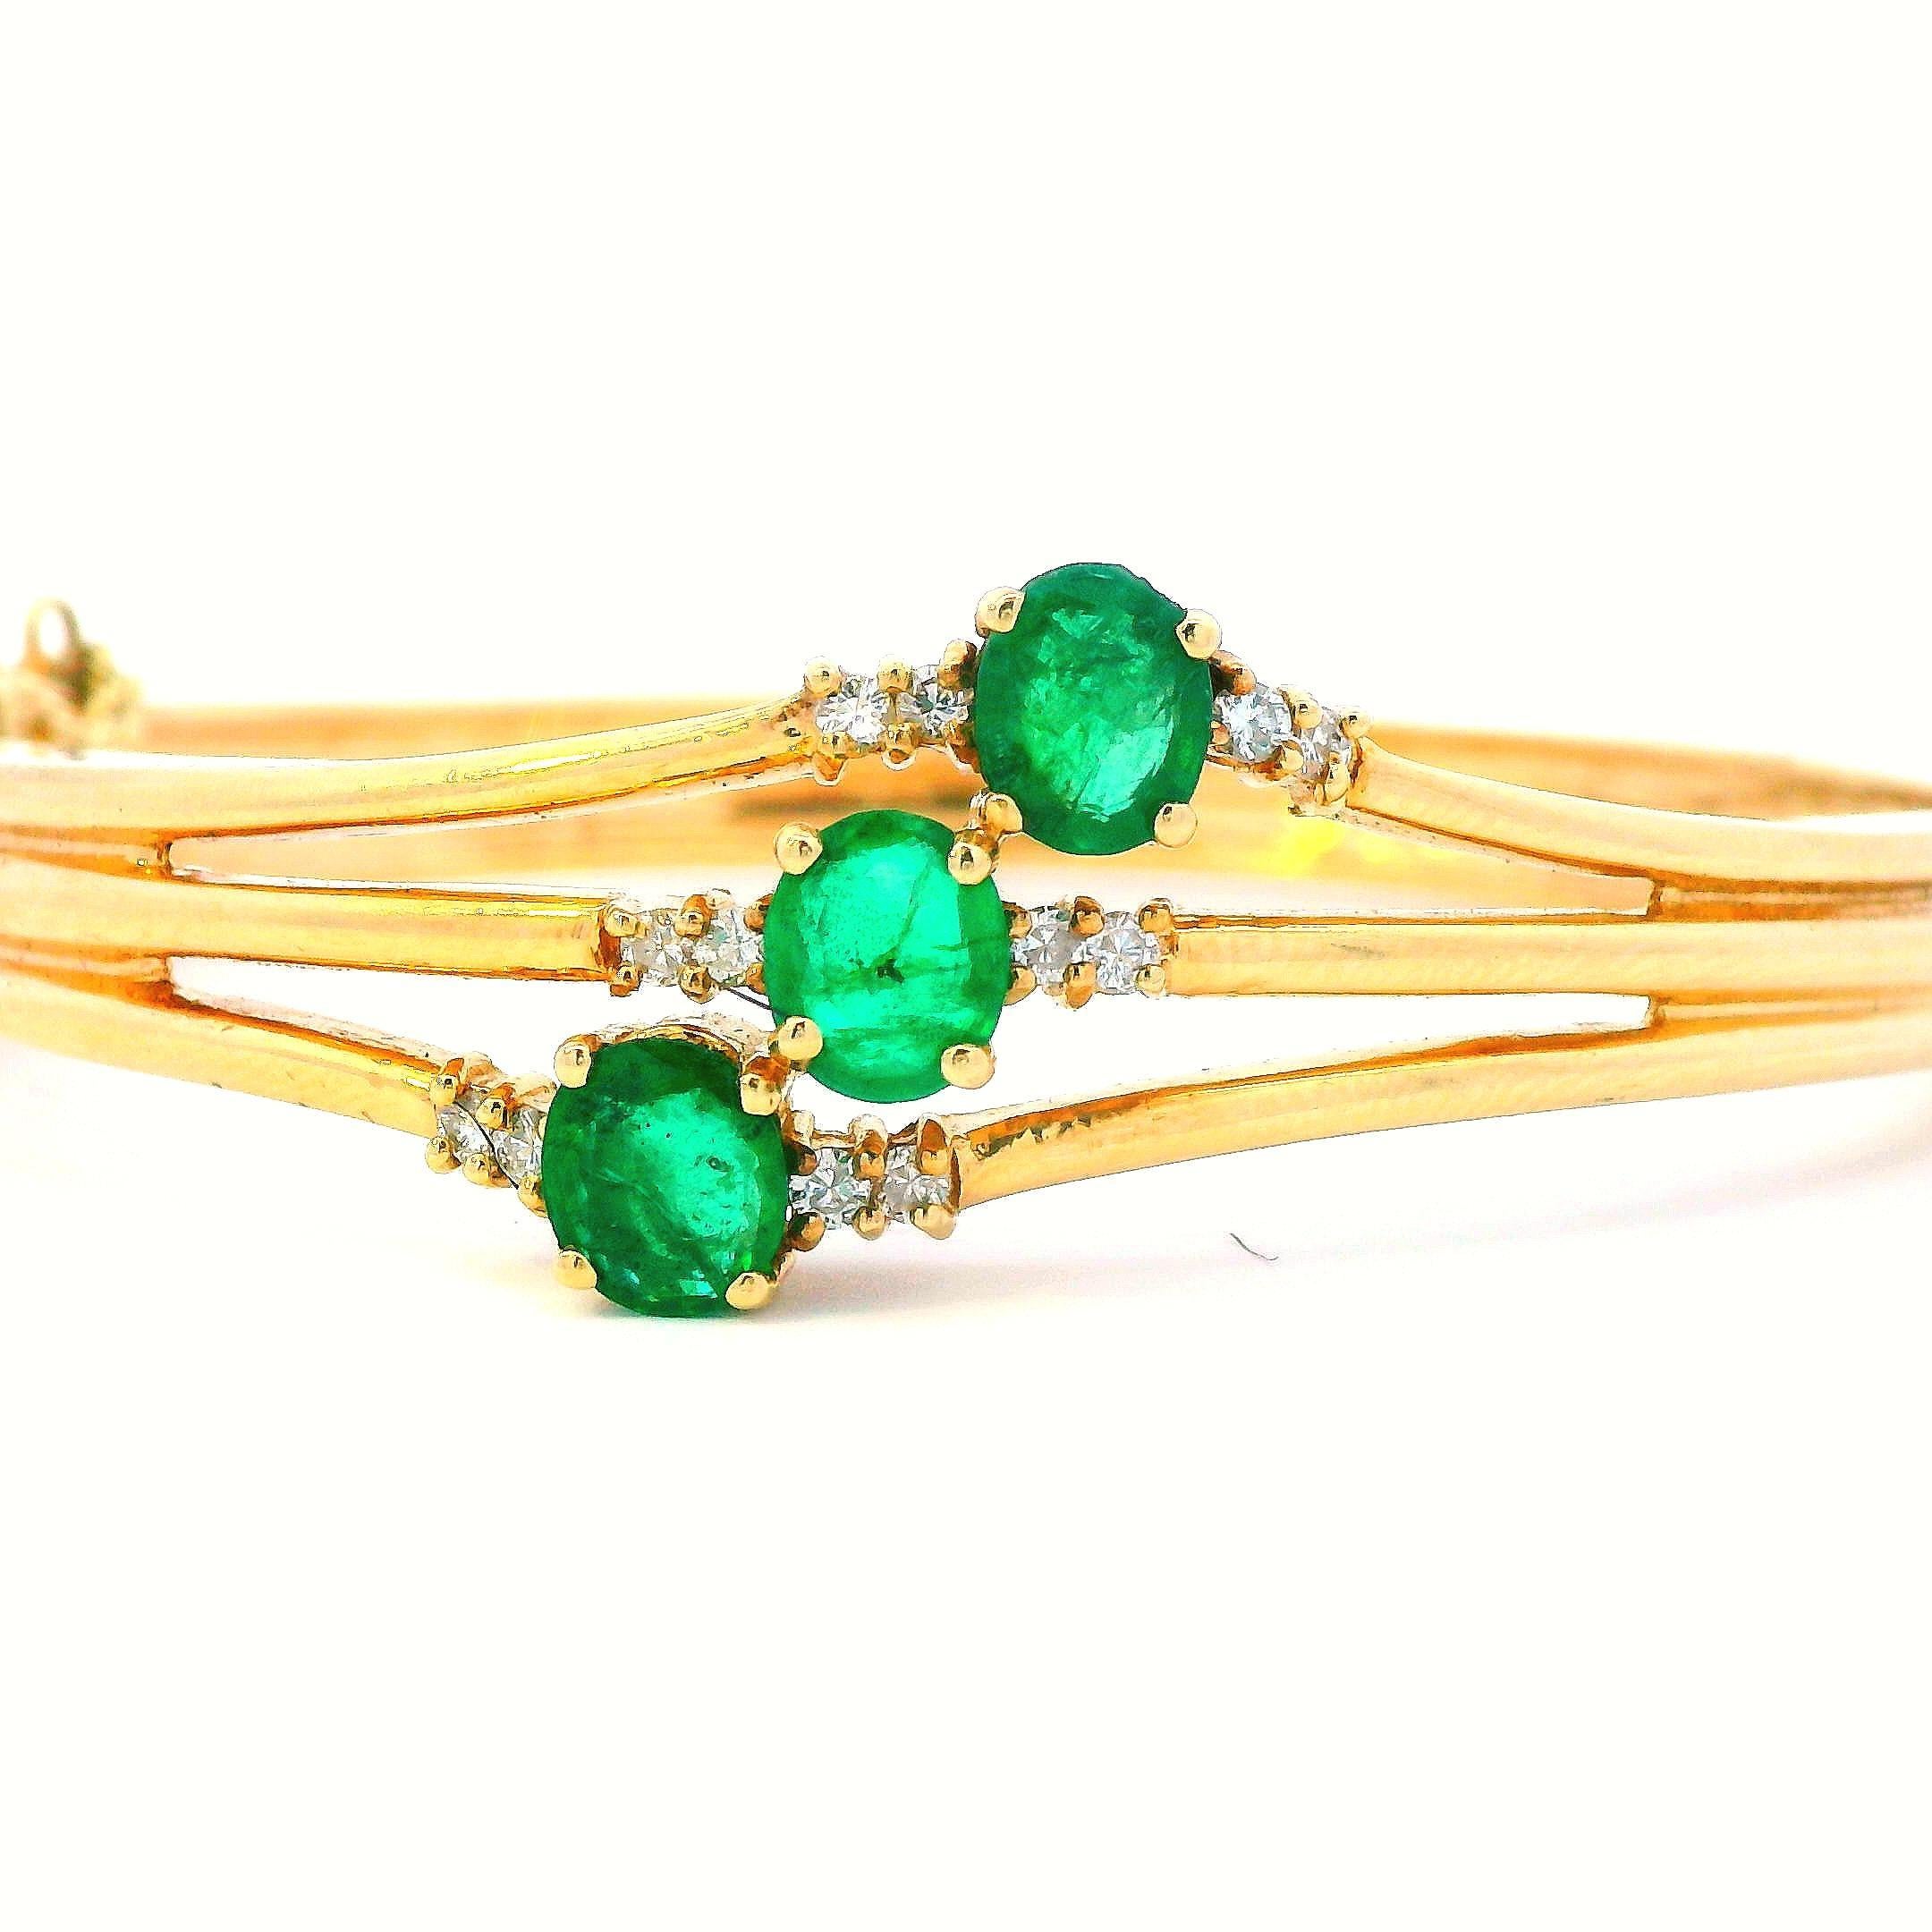 1960s 14k Yellow Gold Emerald and Diamond Bangle In Excellent Condition For Sale In Lexington, KY